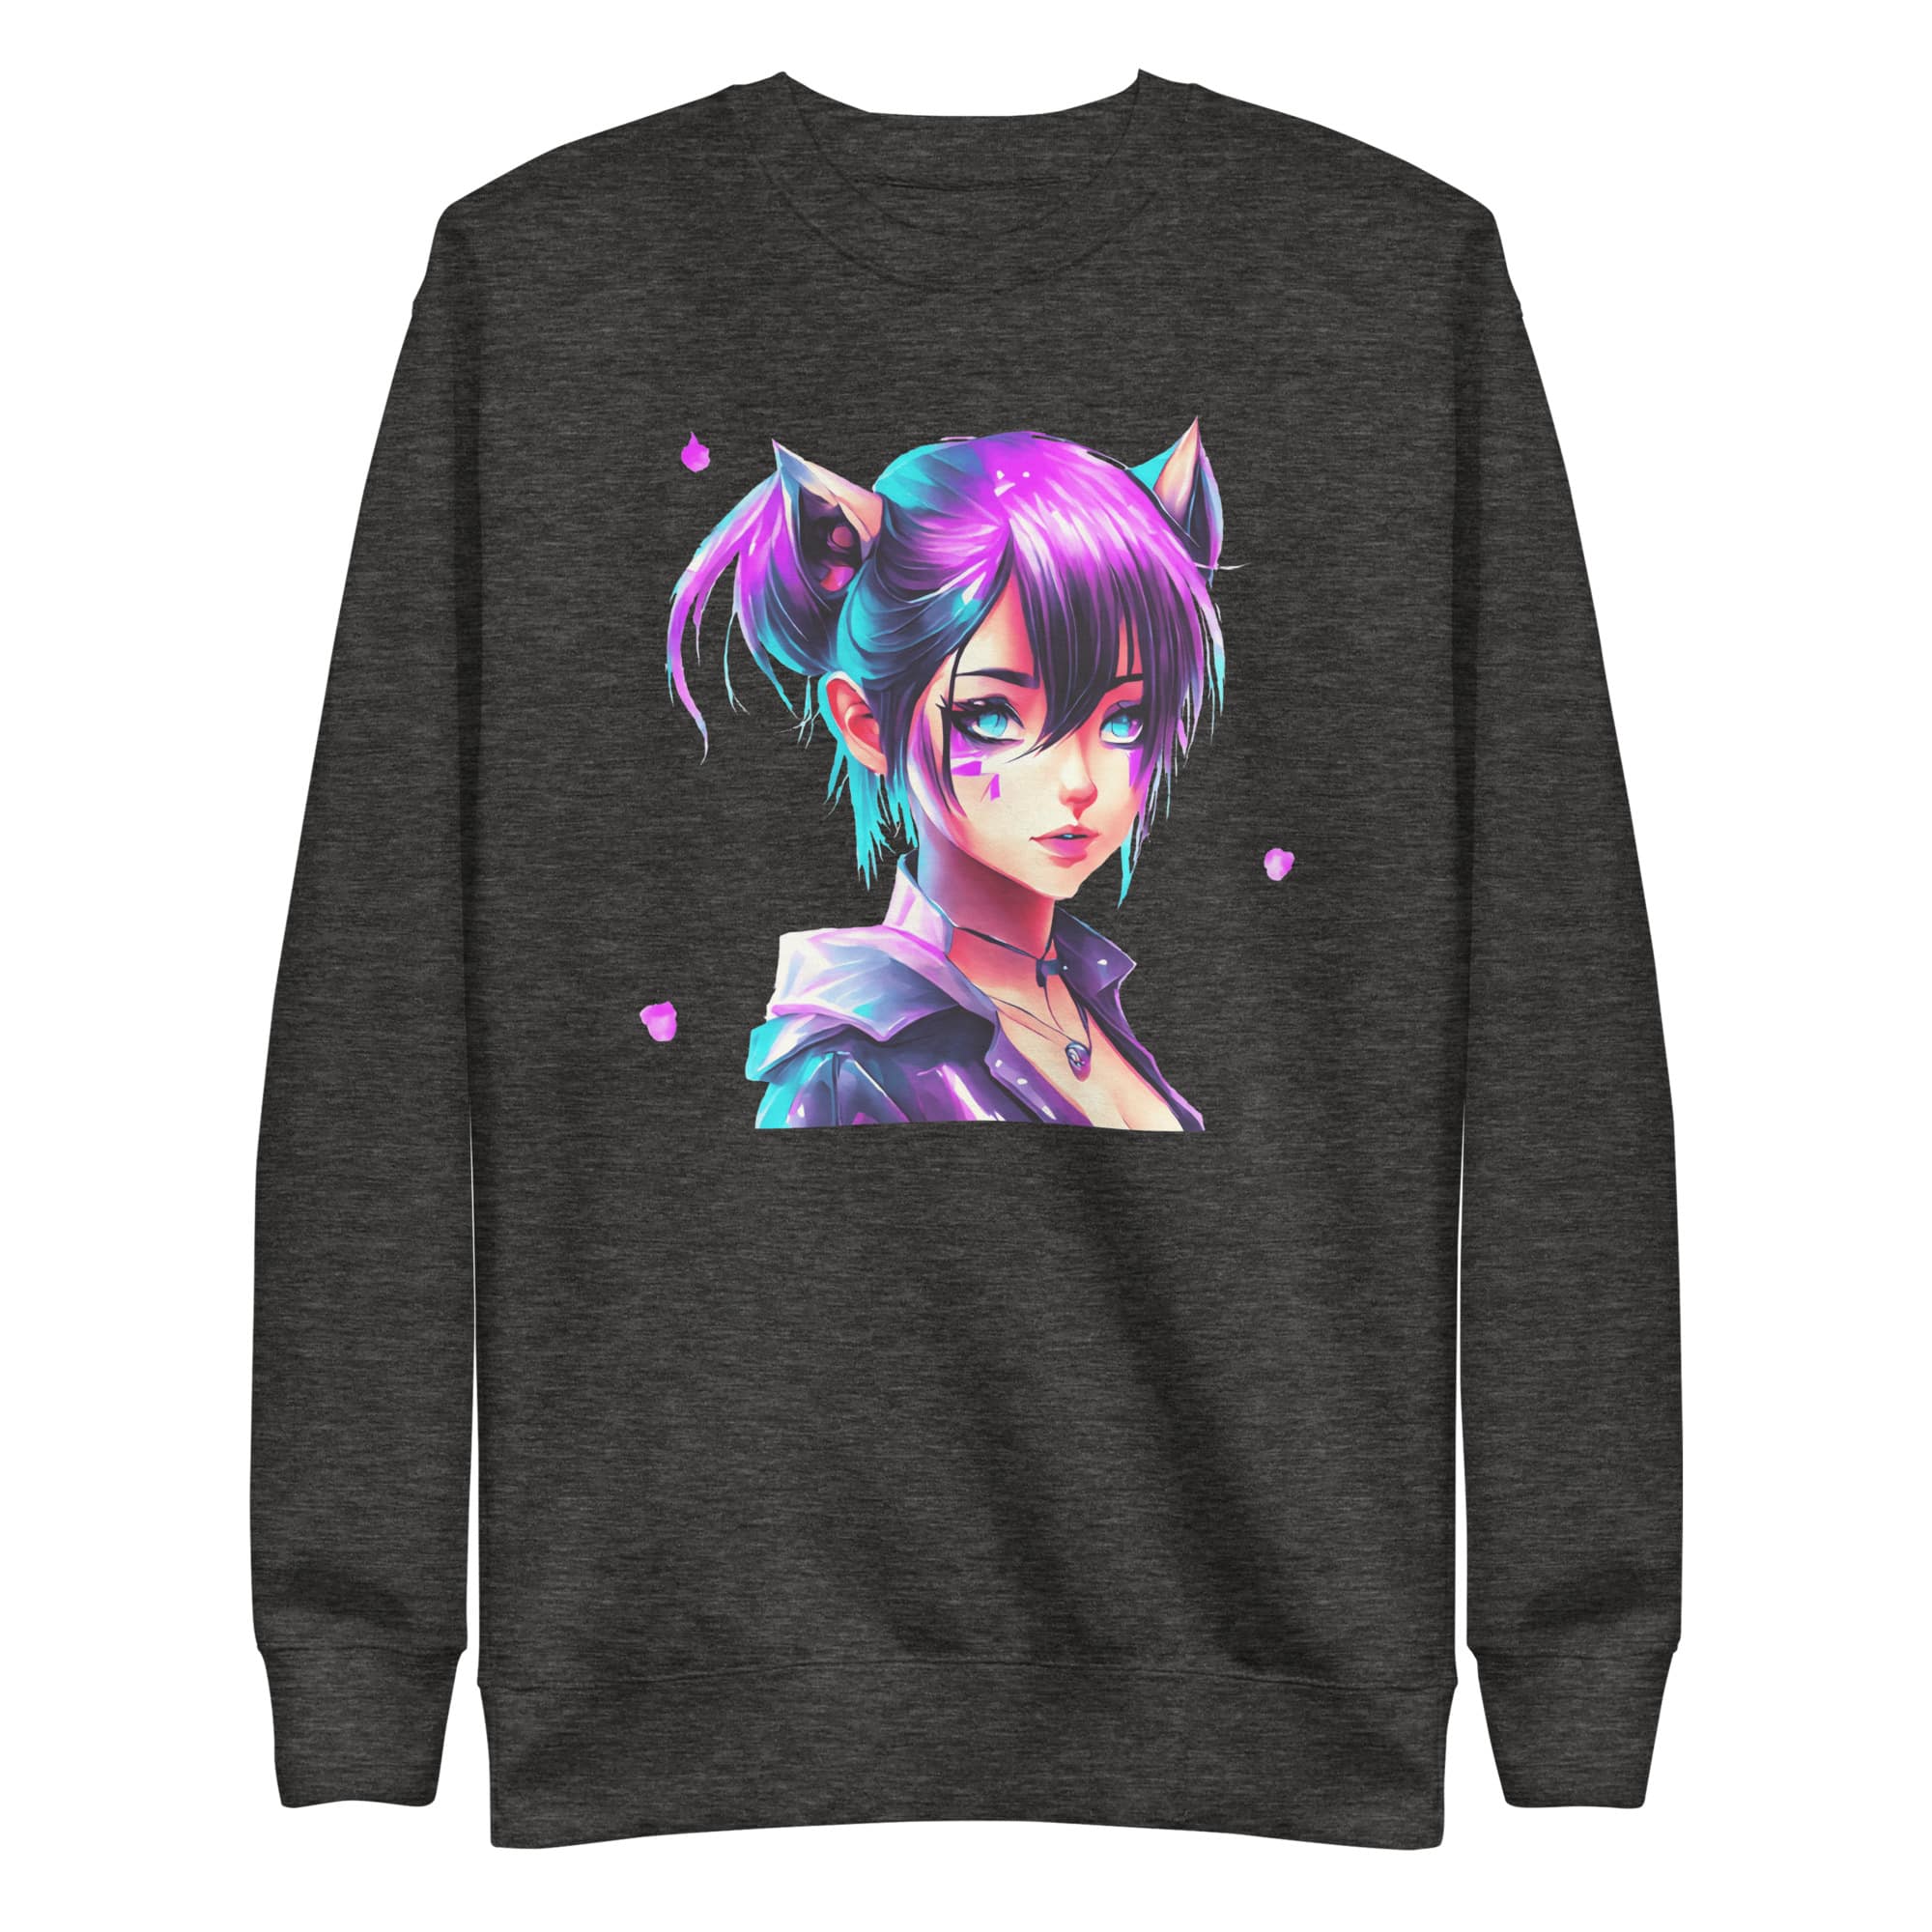 Anime Cat Girl Abstract Sweatshirt Video game store Gaming merchandise Gaming accessories shop Online gaming store Video game shop near me Gaming console store PC gaming store Gaming gear shop Retro gaming shop Board game shop Anime merchandise Anime store online Japanese anime shop Anime figurines Manga shop Anime DVDs Anime accessories Anime apparel Anime collectibles Anime gifts